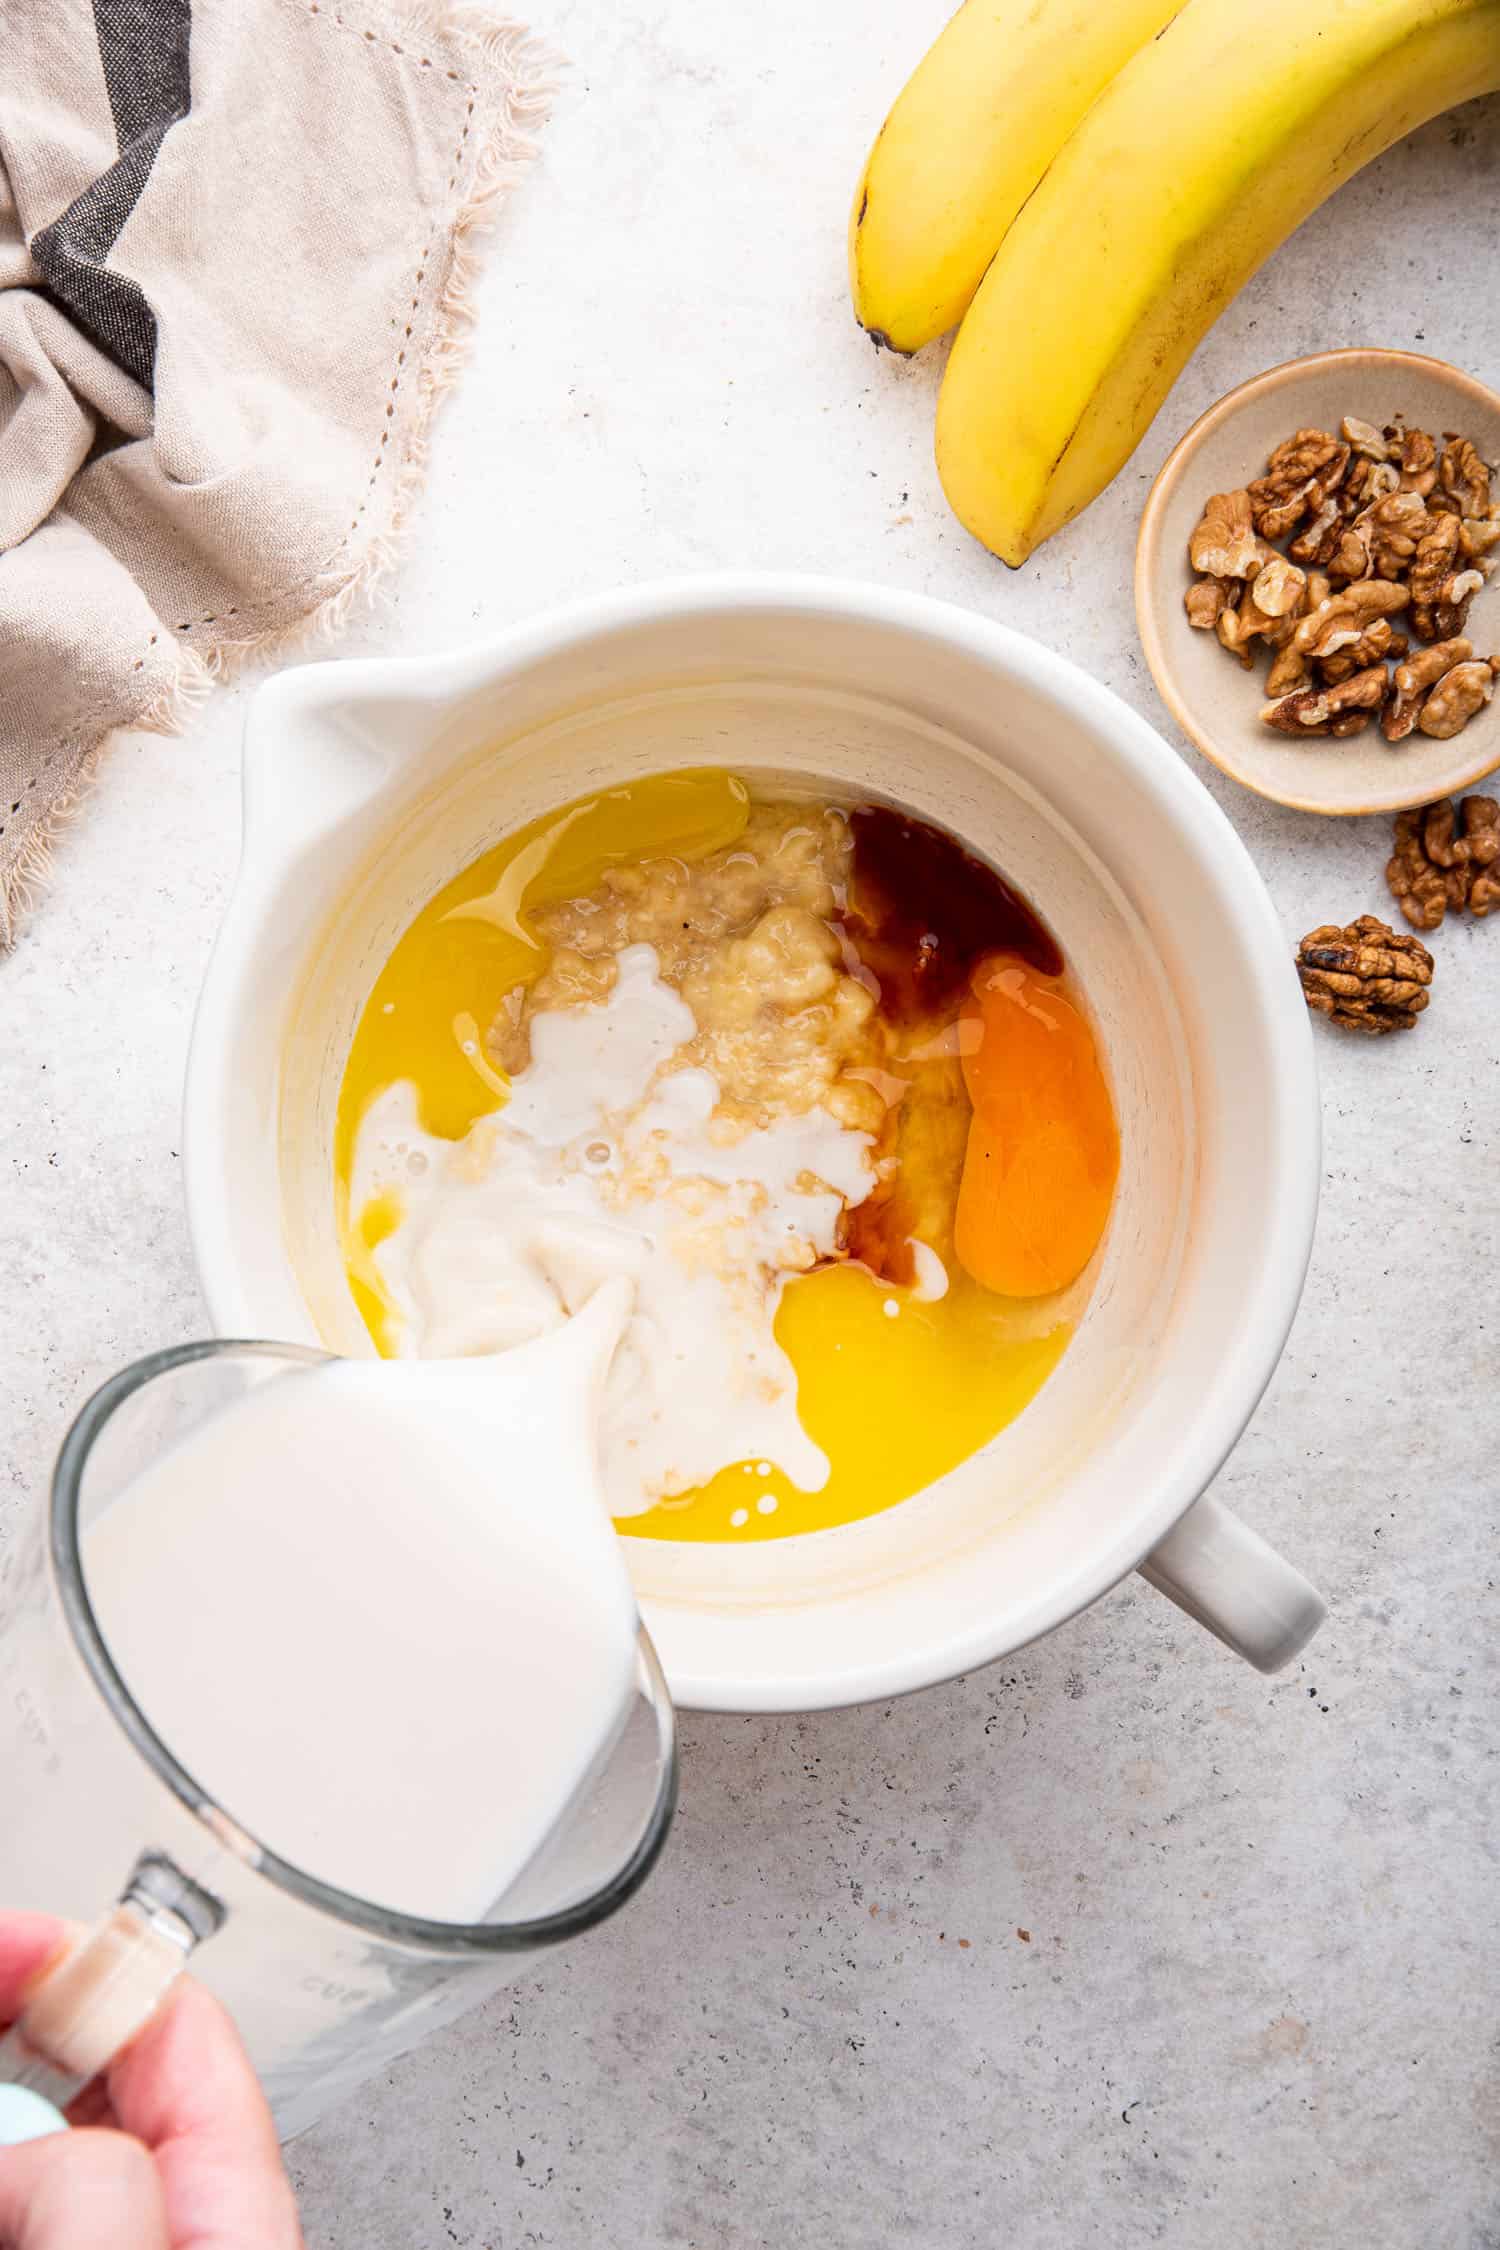 wet ingredients for baked oats in large mixing cup